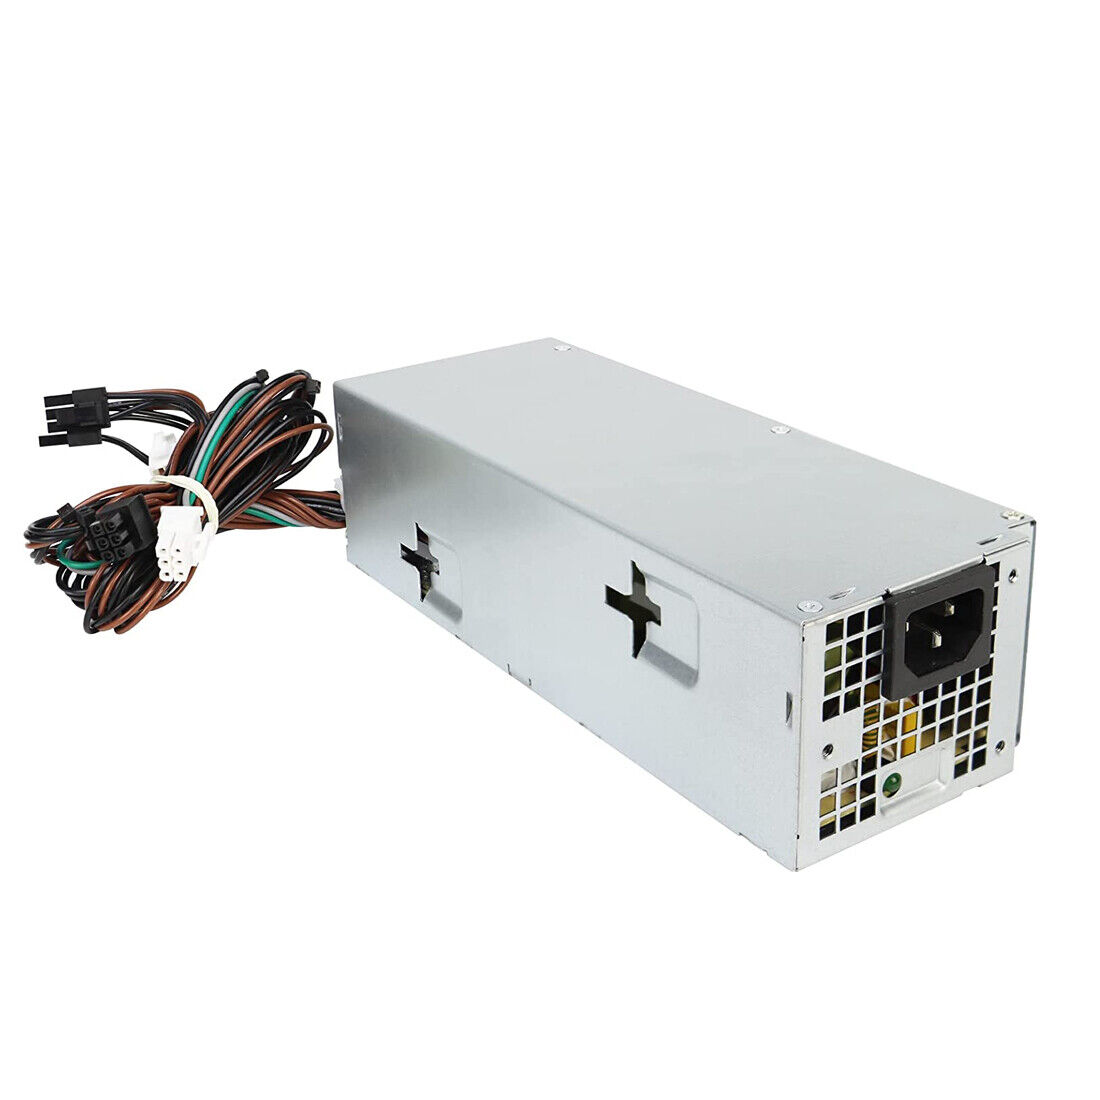 New 4FWF7 460W PSU Power Supply For Dell XPS 8940 MT 04FWF7 H460EGM-00 D460E001P